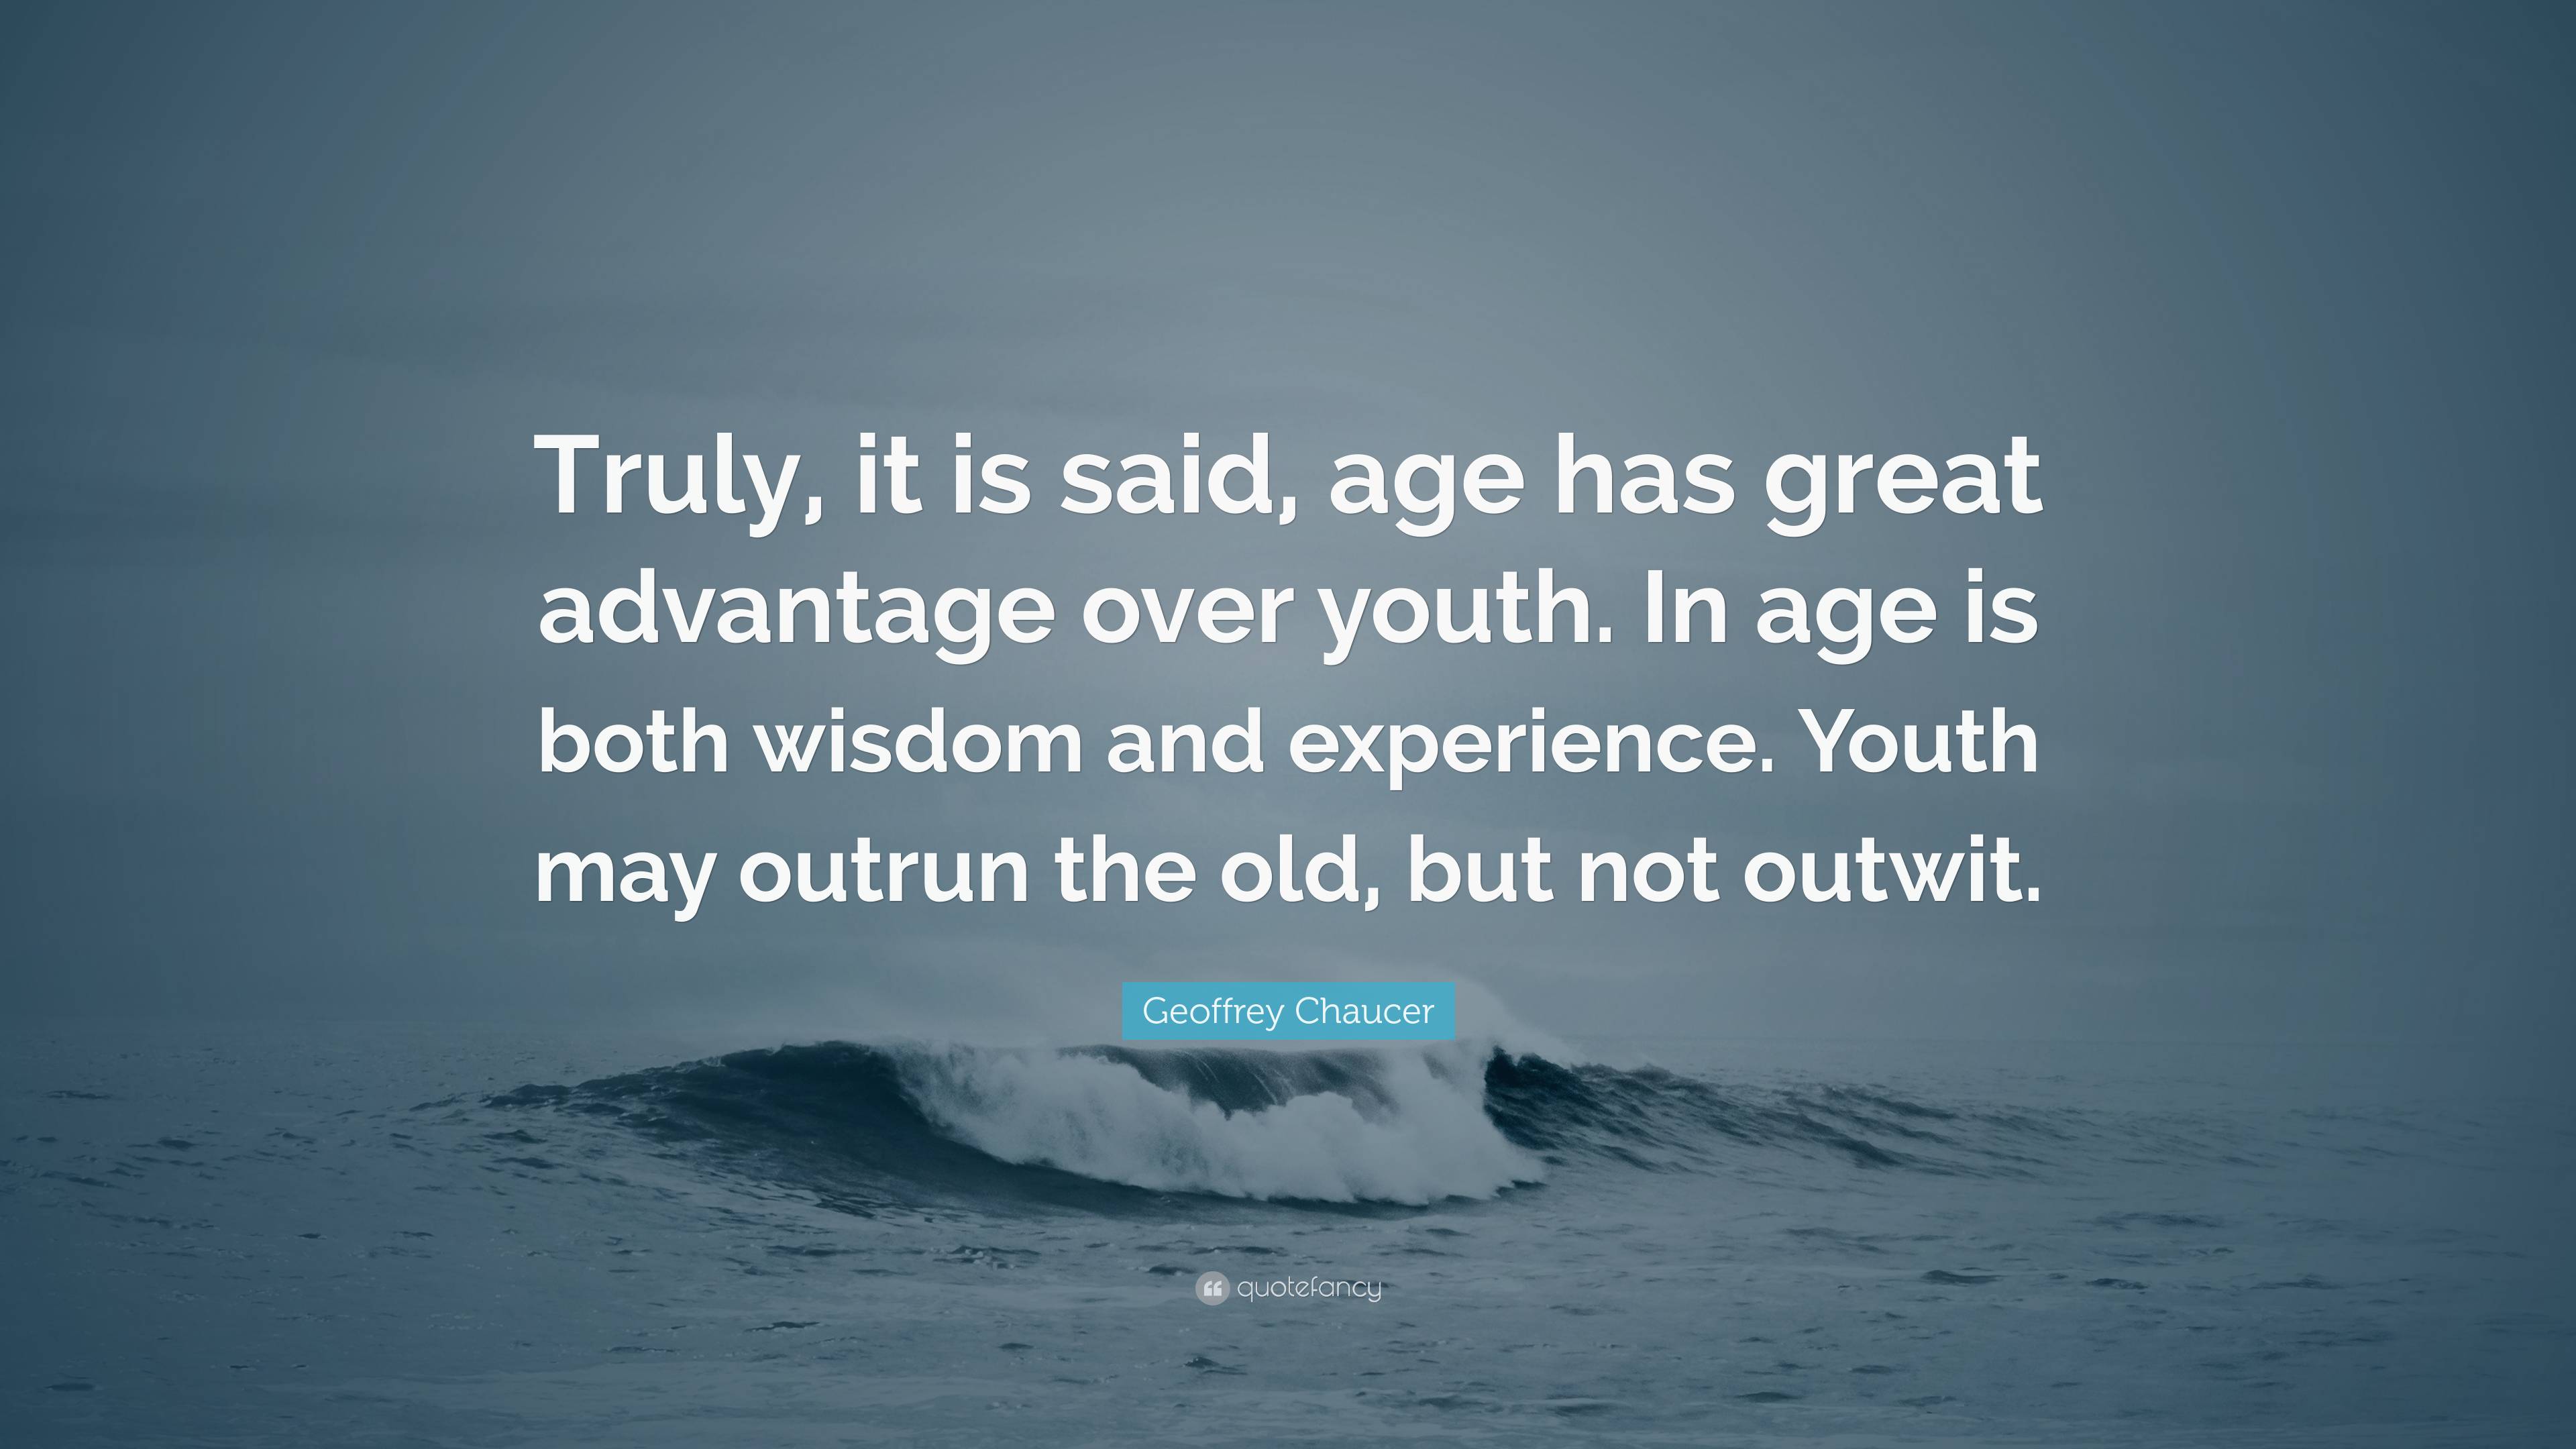 Geoffrey Chaucer Quote: “Truly, it is said, age has great advantage ...